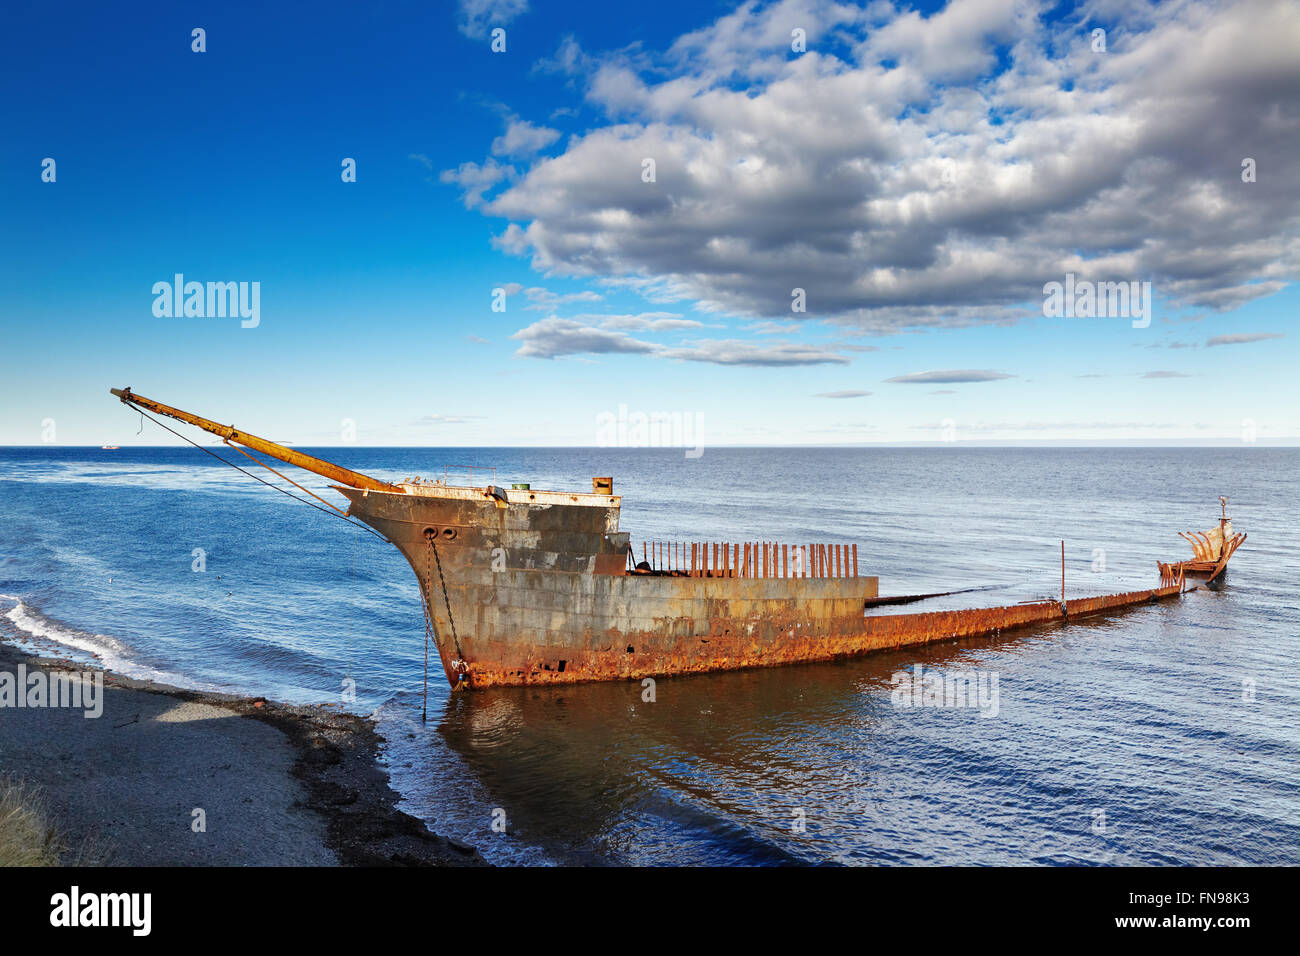 Remains of the Lord Lonsdale frigate, Strait of Magellan, near Punta Arenas, Chile Stock Photo